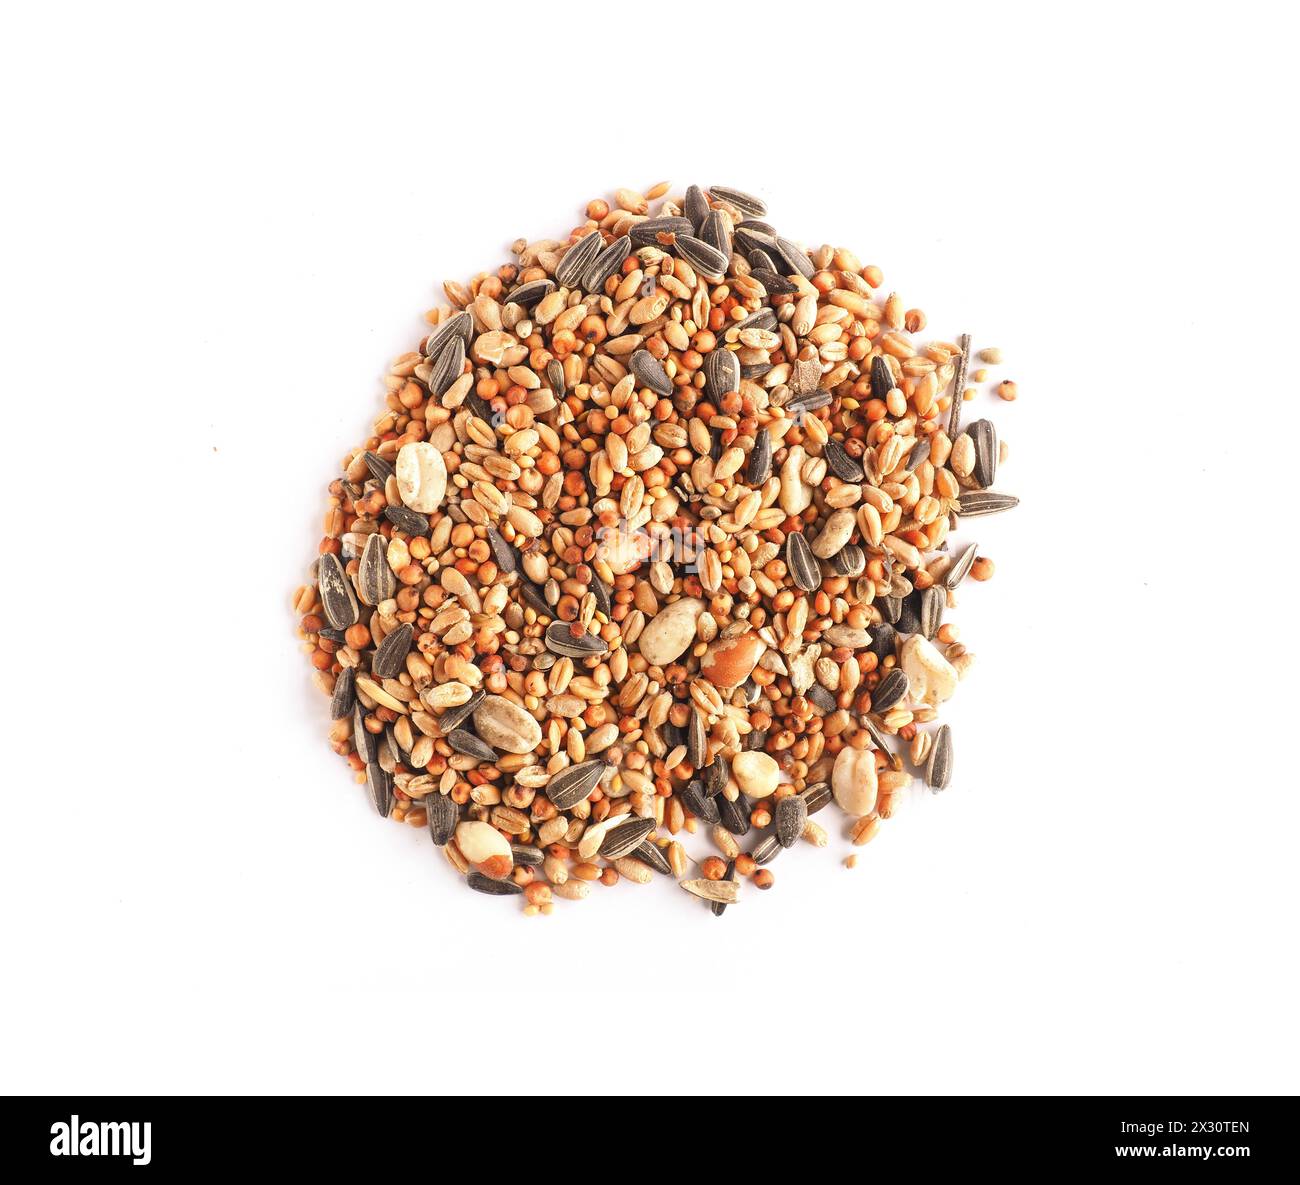 Bird food on a white studio background, close up, bird feeding concept, view from above Stock Photo